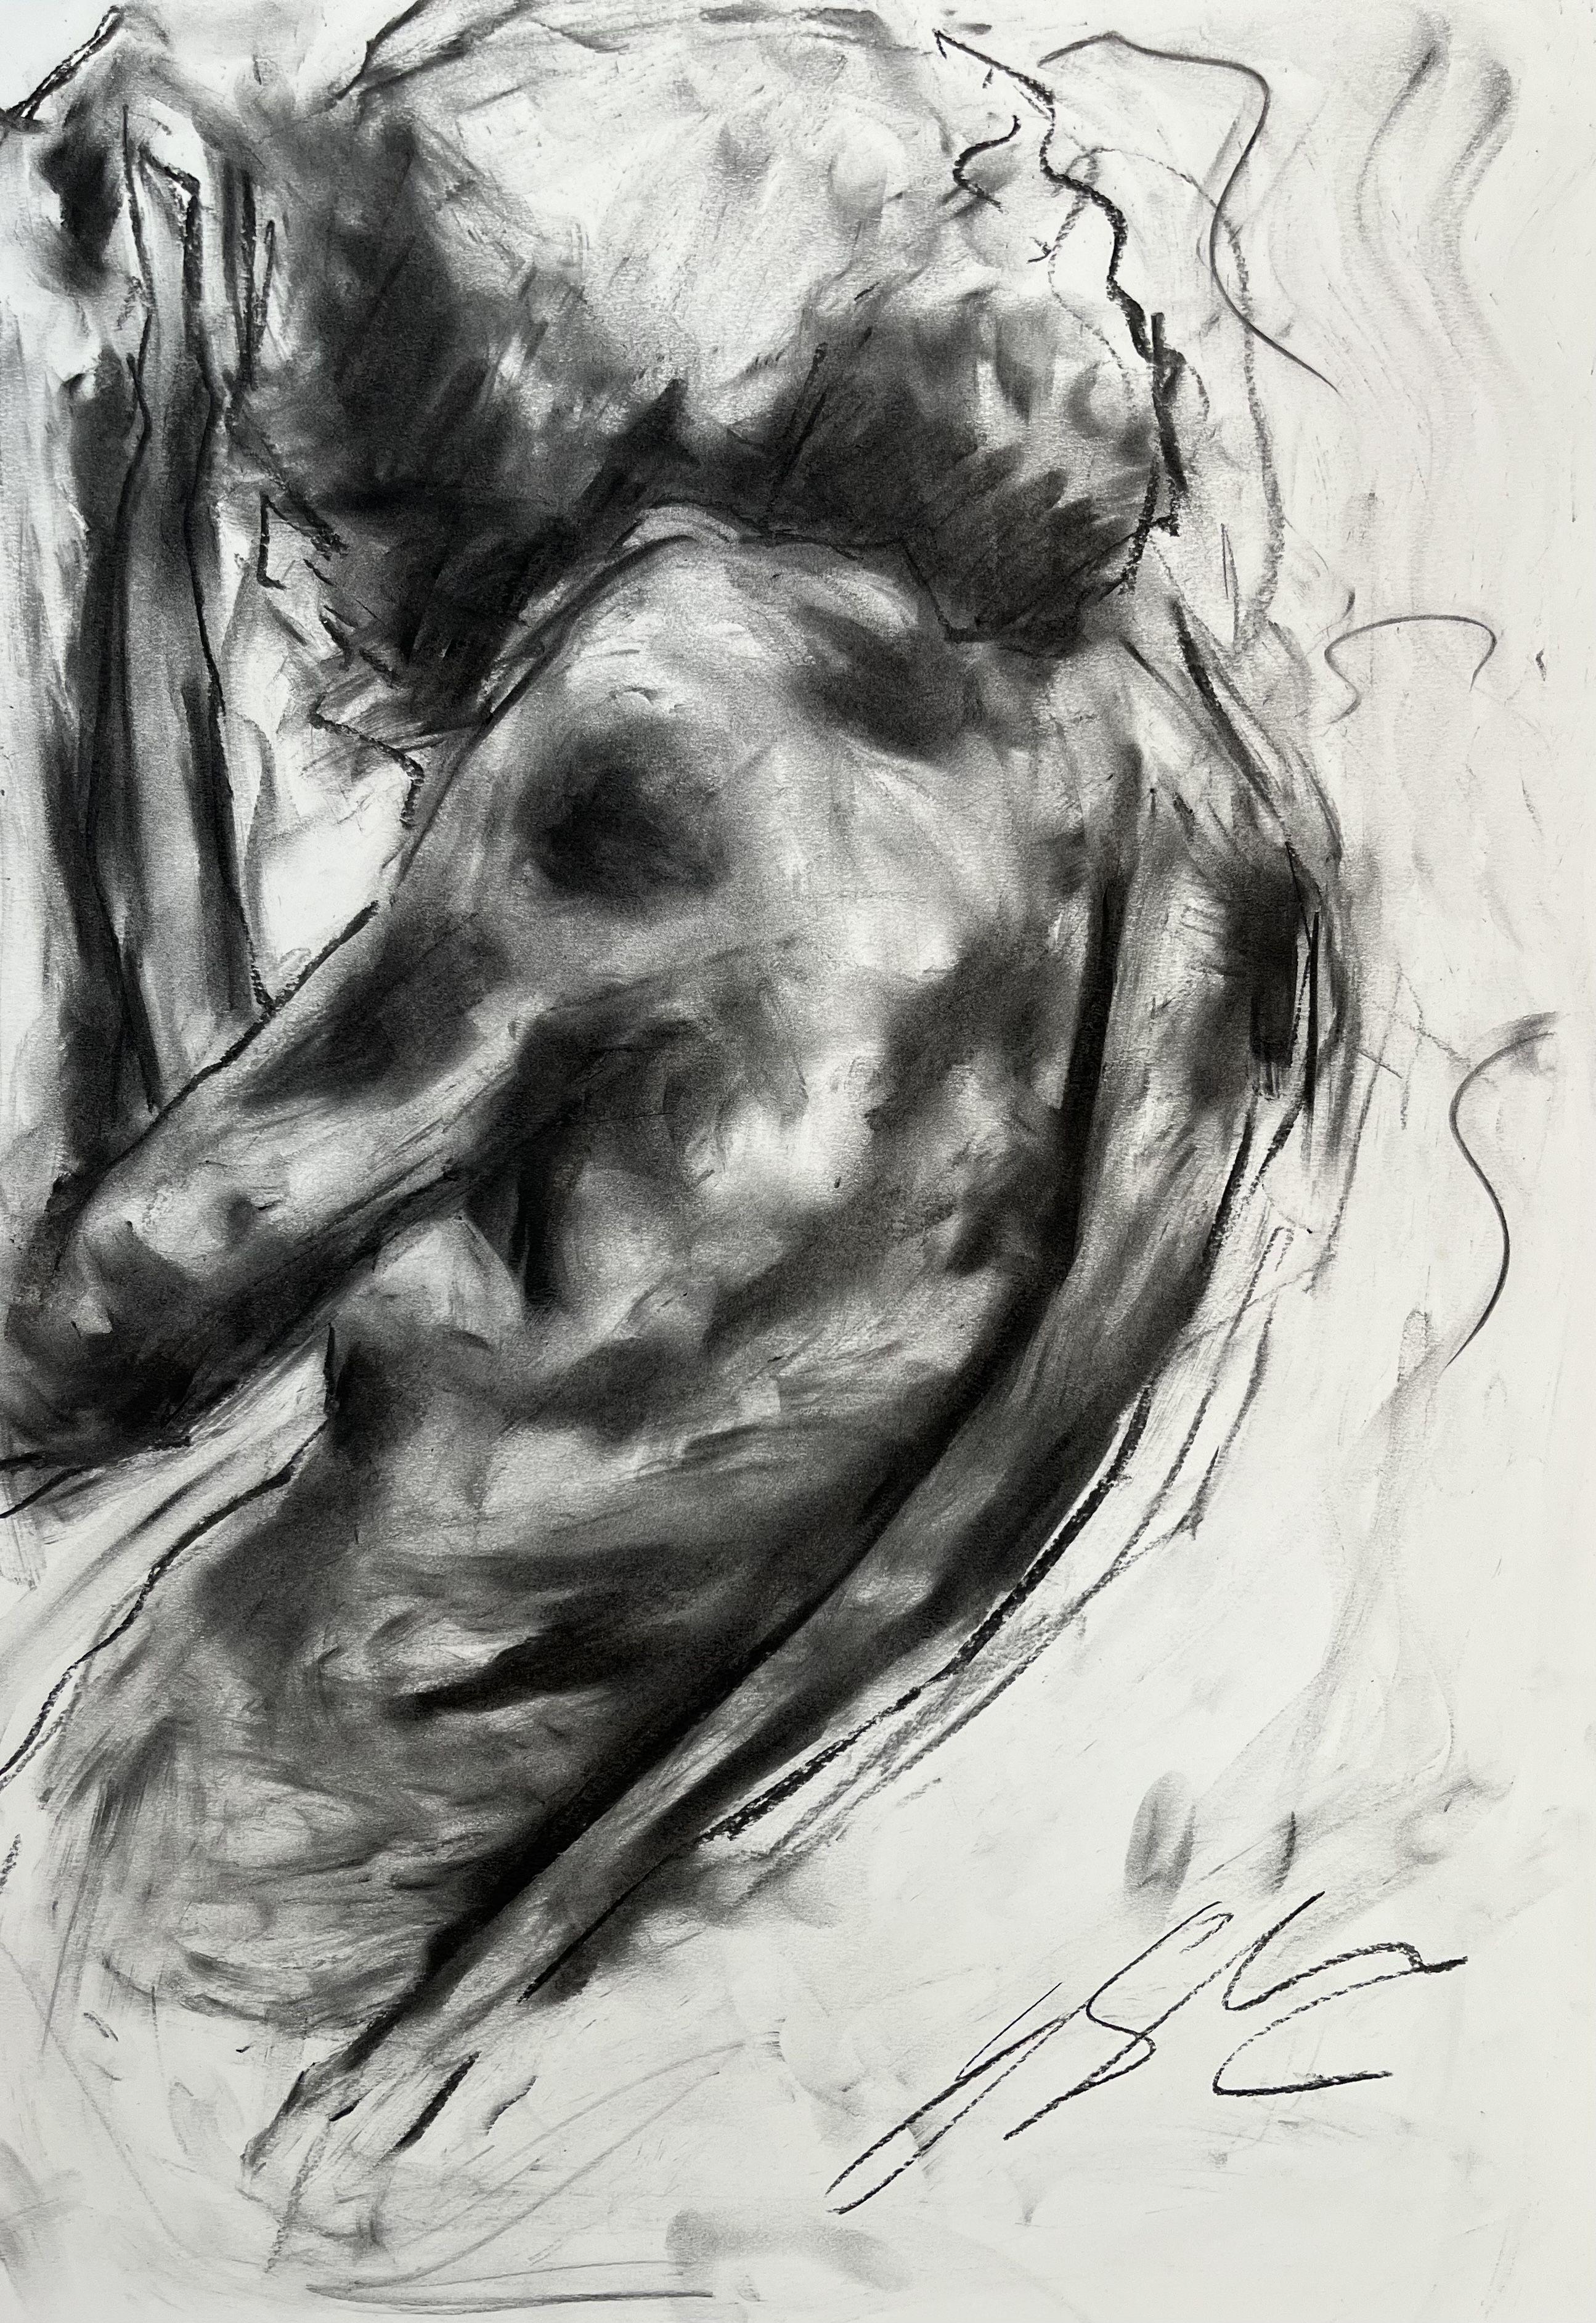 CrackâEs, Drawing, Charcoal on Paper - Art by James Shipton